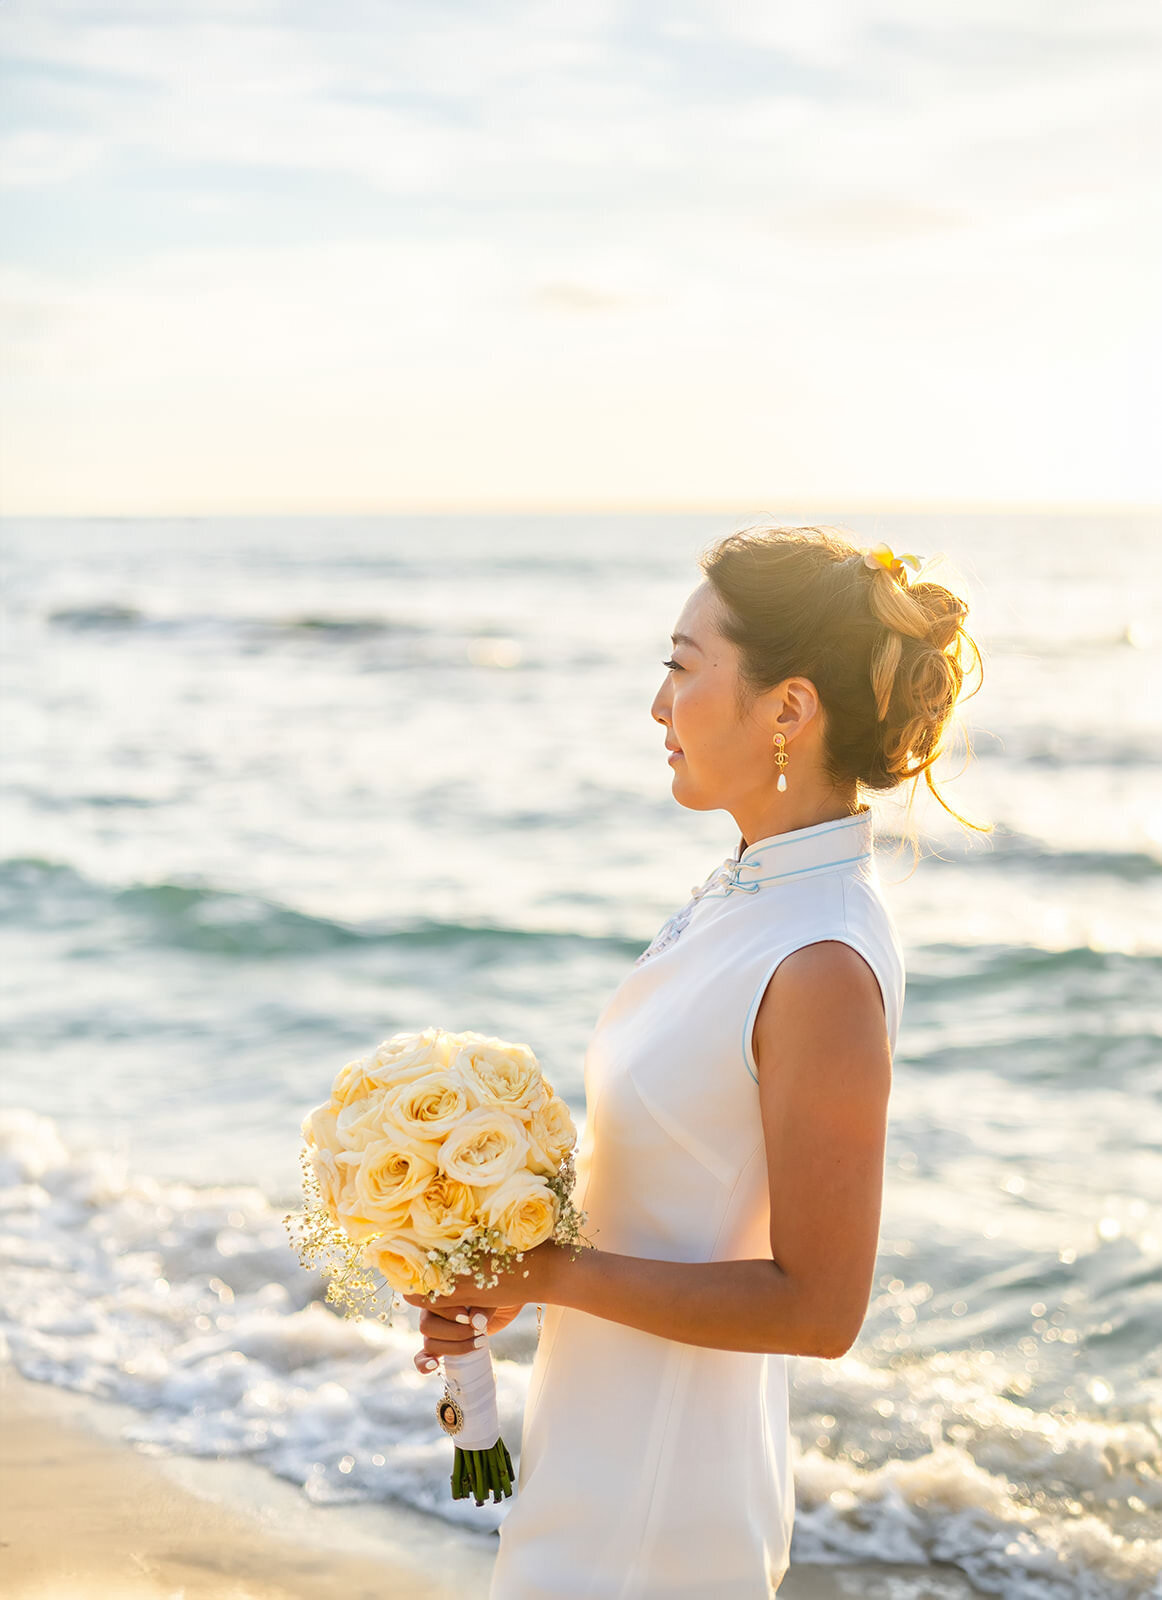 ethereal bride with rose bouquet at the beach  gazing out  at the ocean